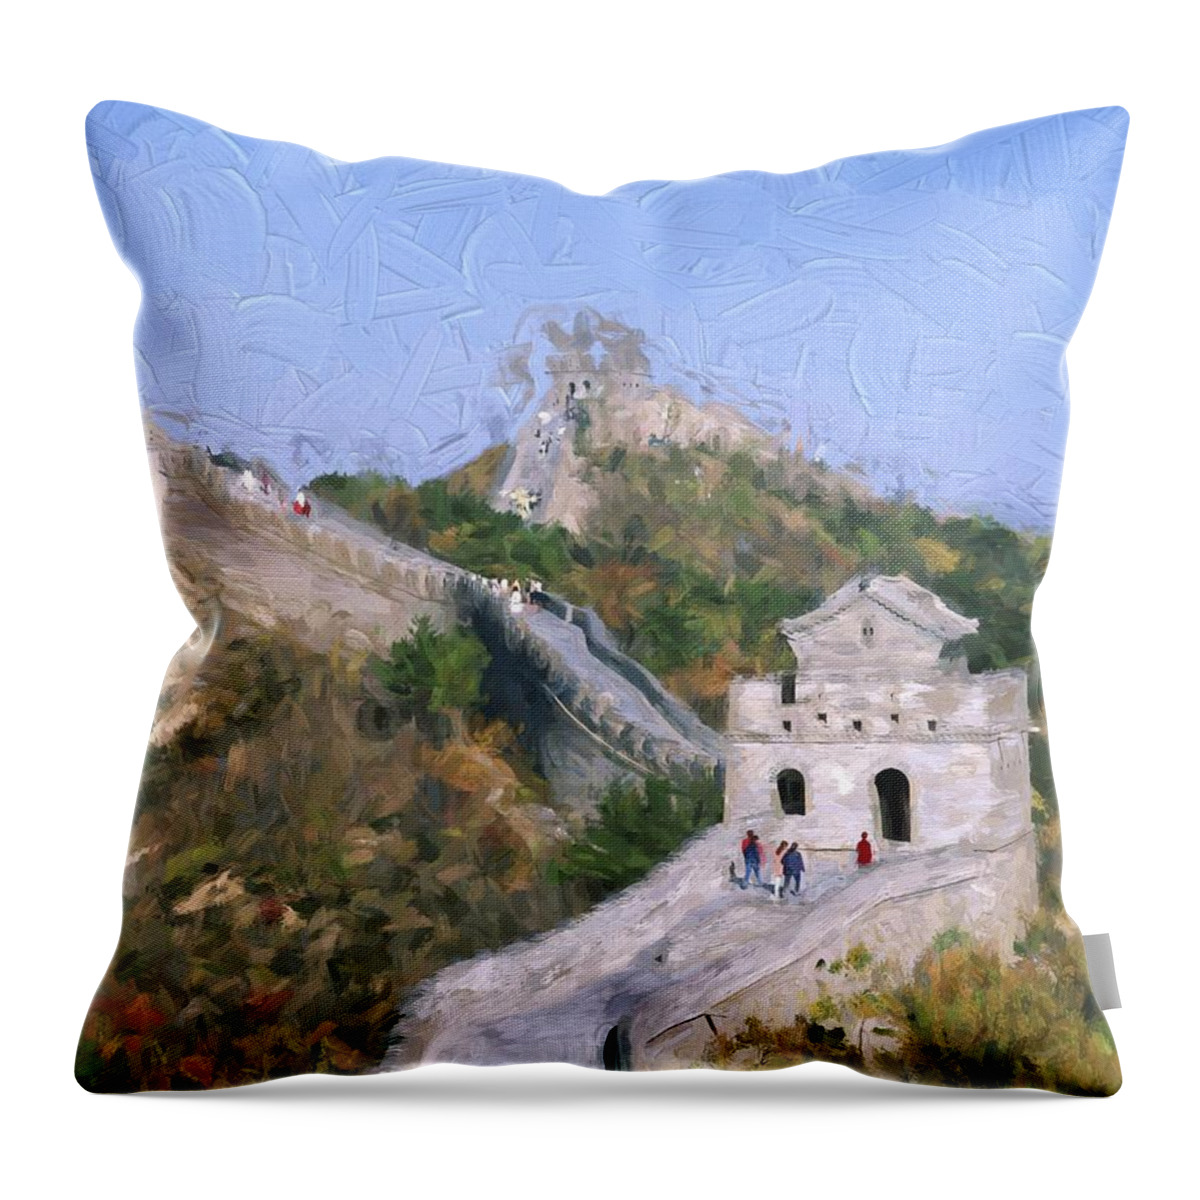 China Throw Pillow featuring the painting Great Wall at Badaling by Patrick Hoenderkamp